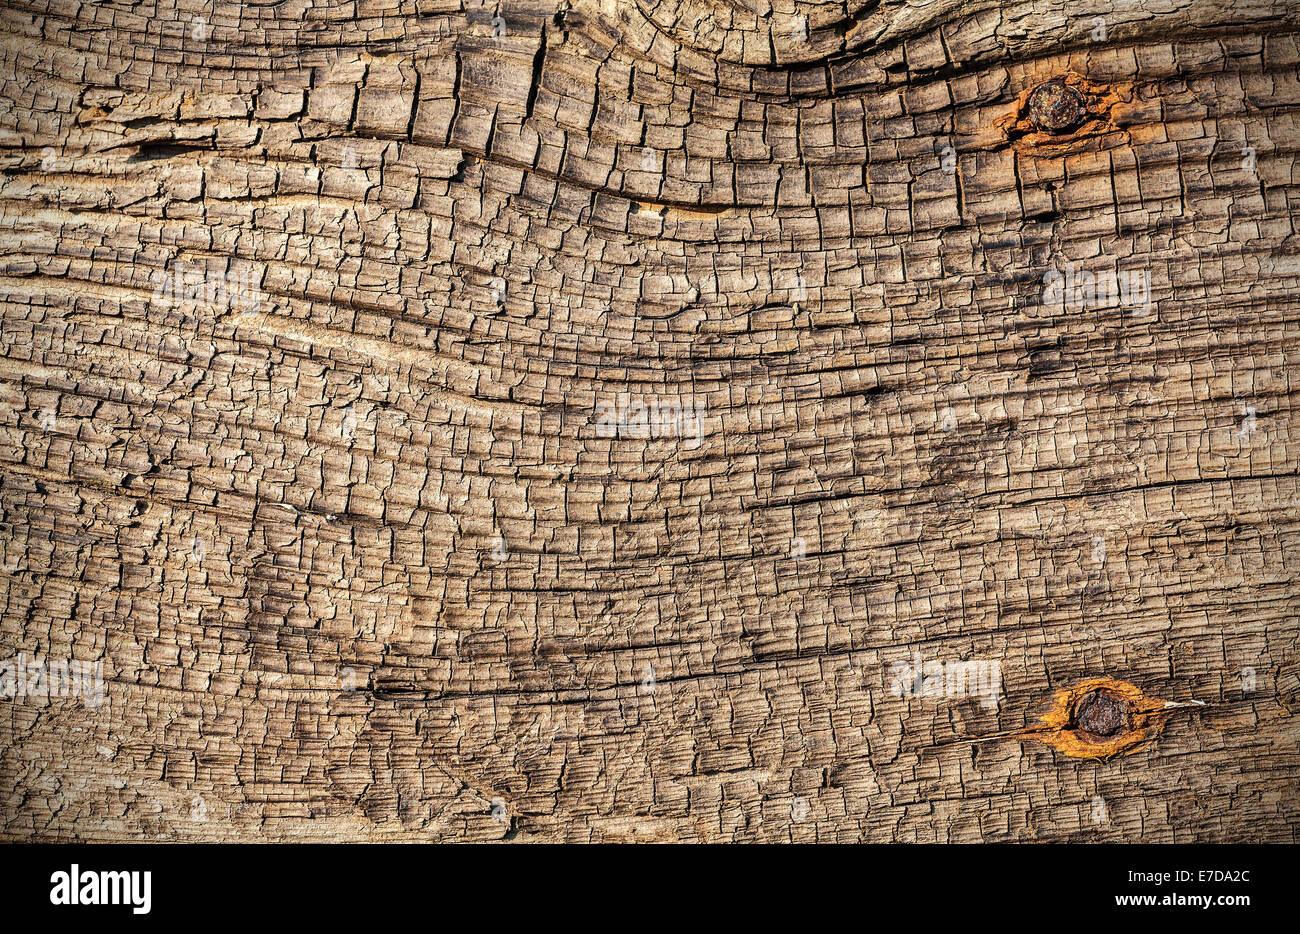 Texture of wood use as natural background. Stock Photo